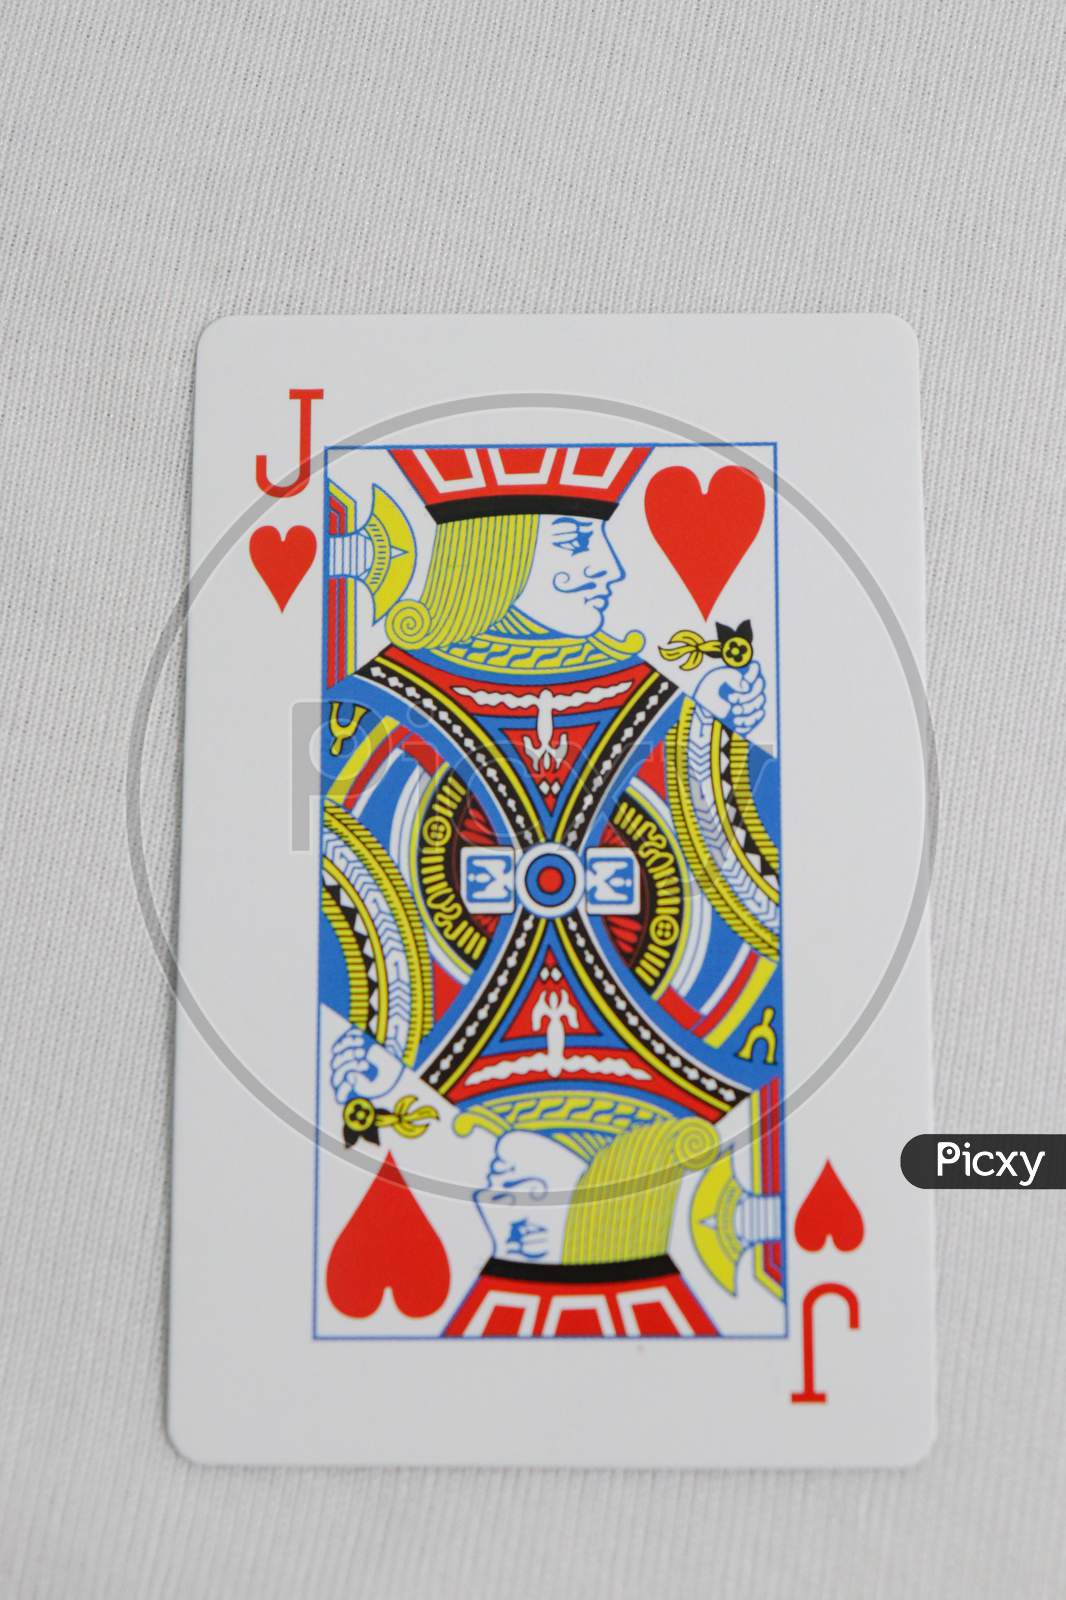 Playing cards